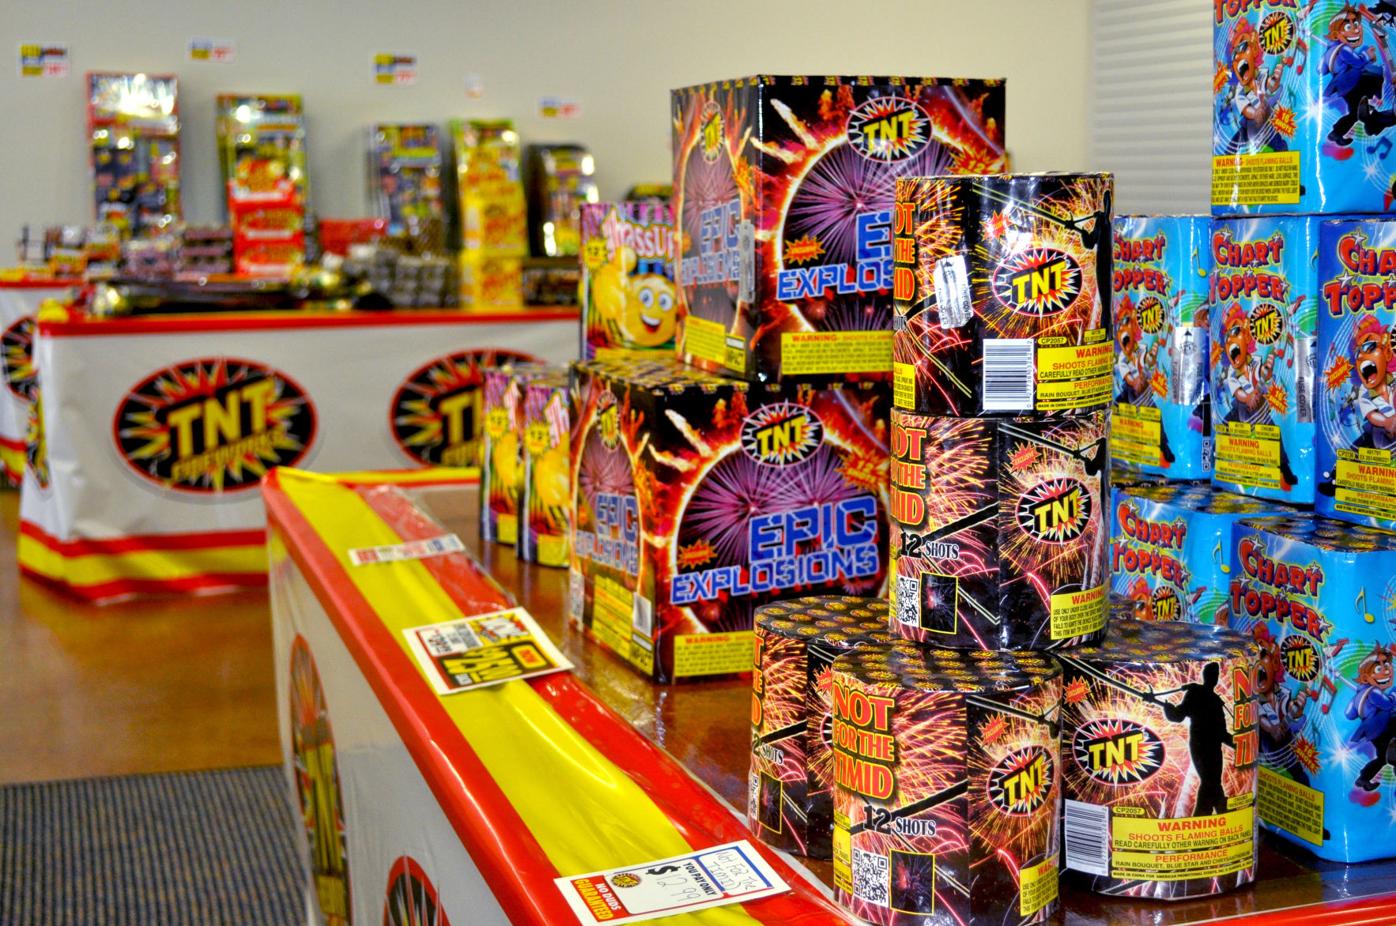 City of Canton approves new fireworks ordinances Local News